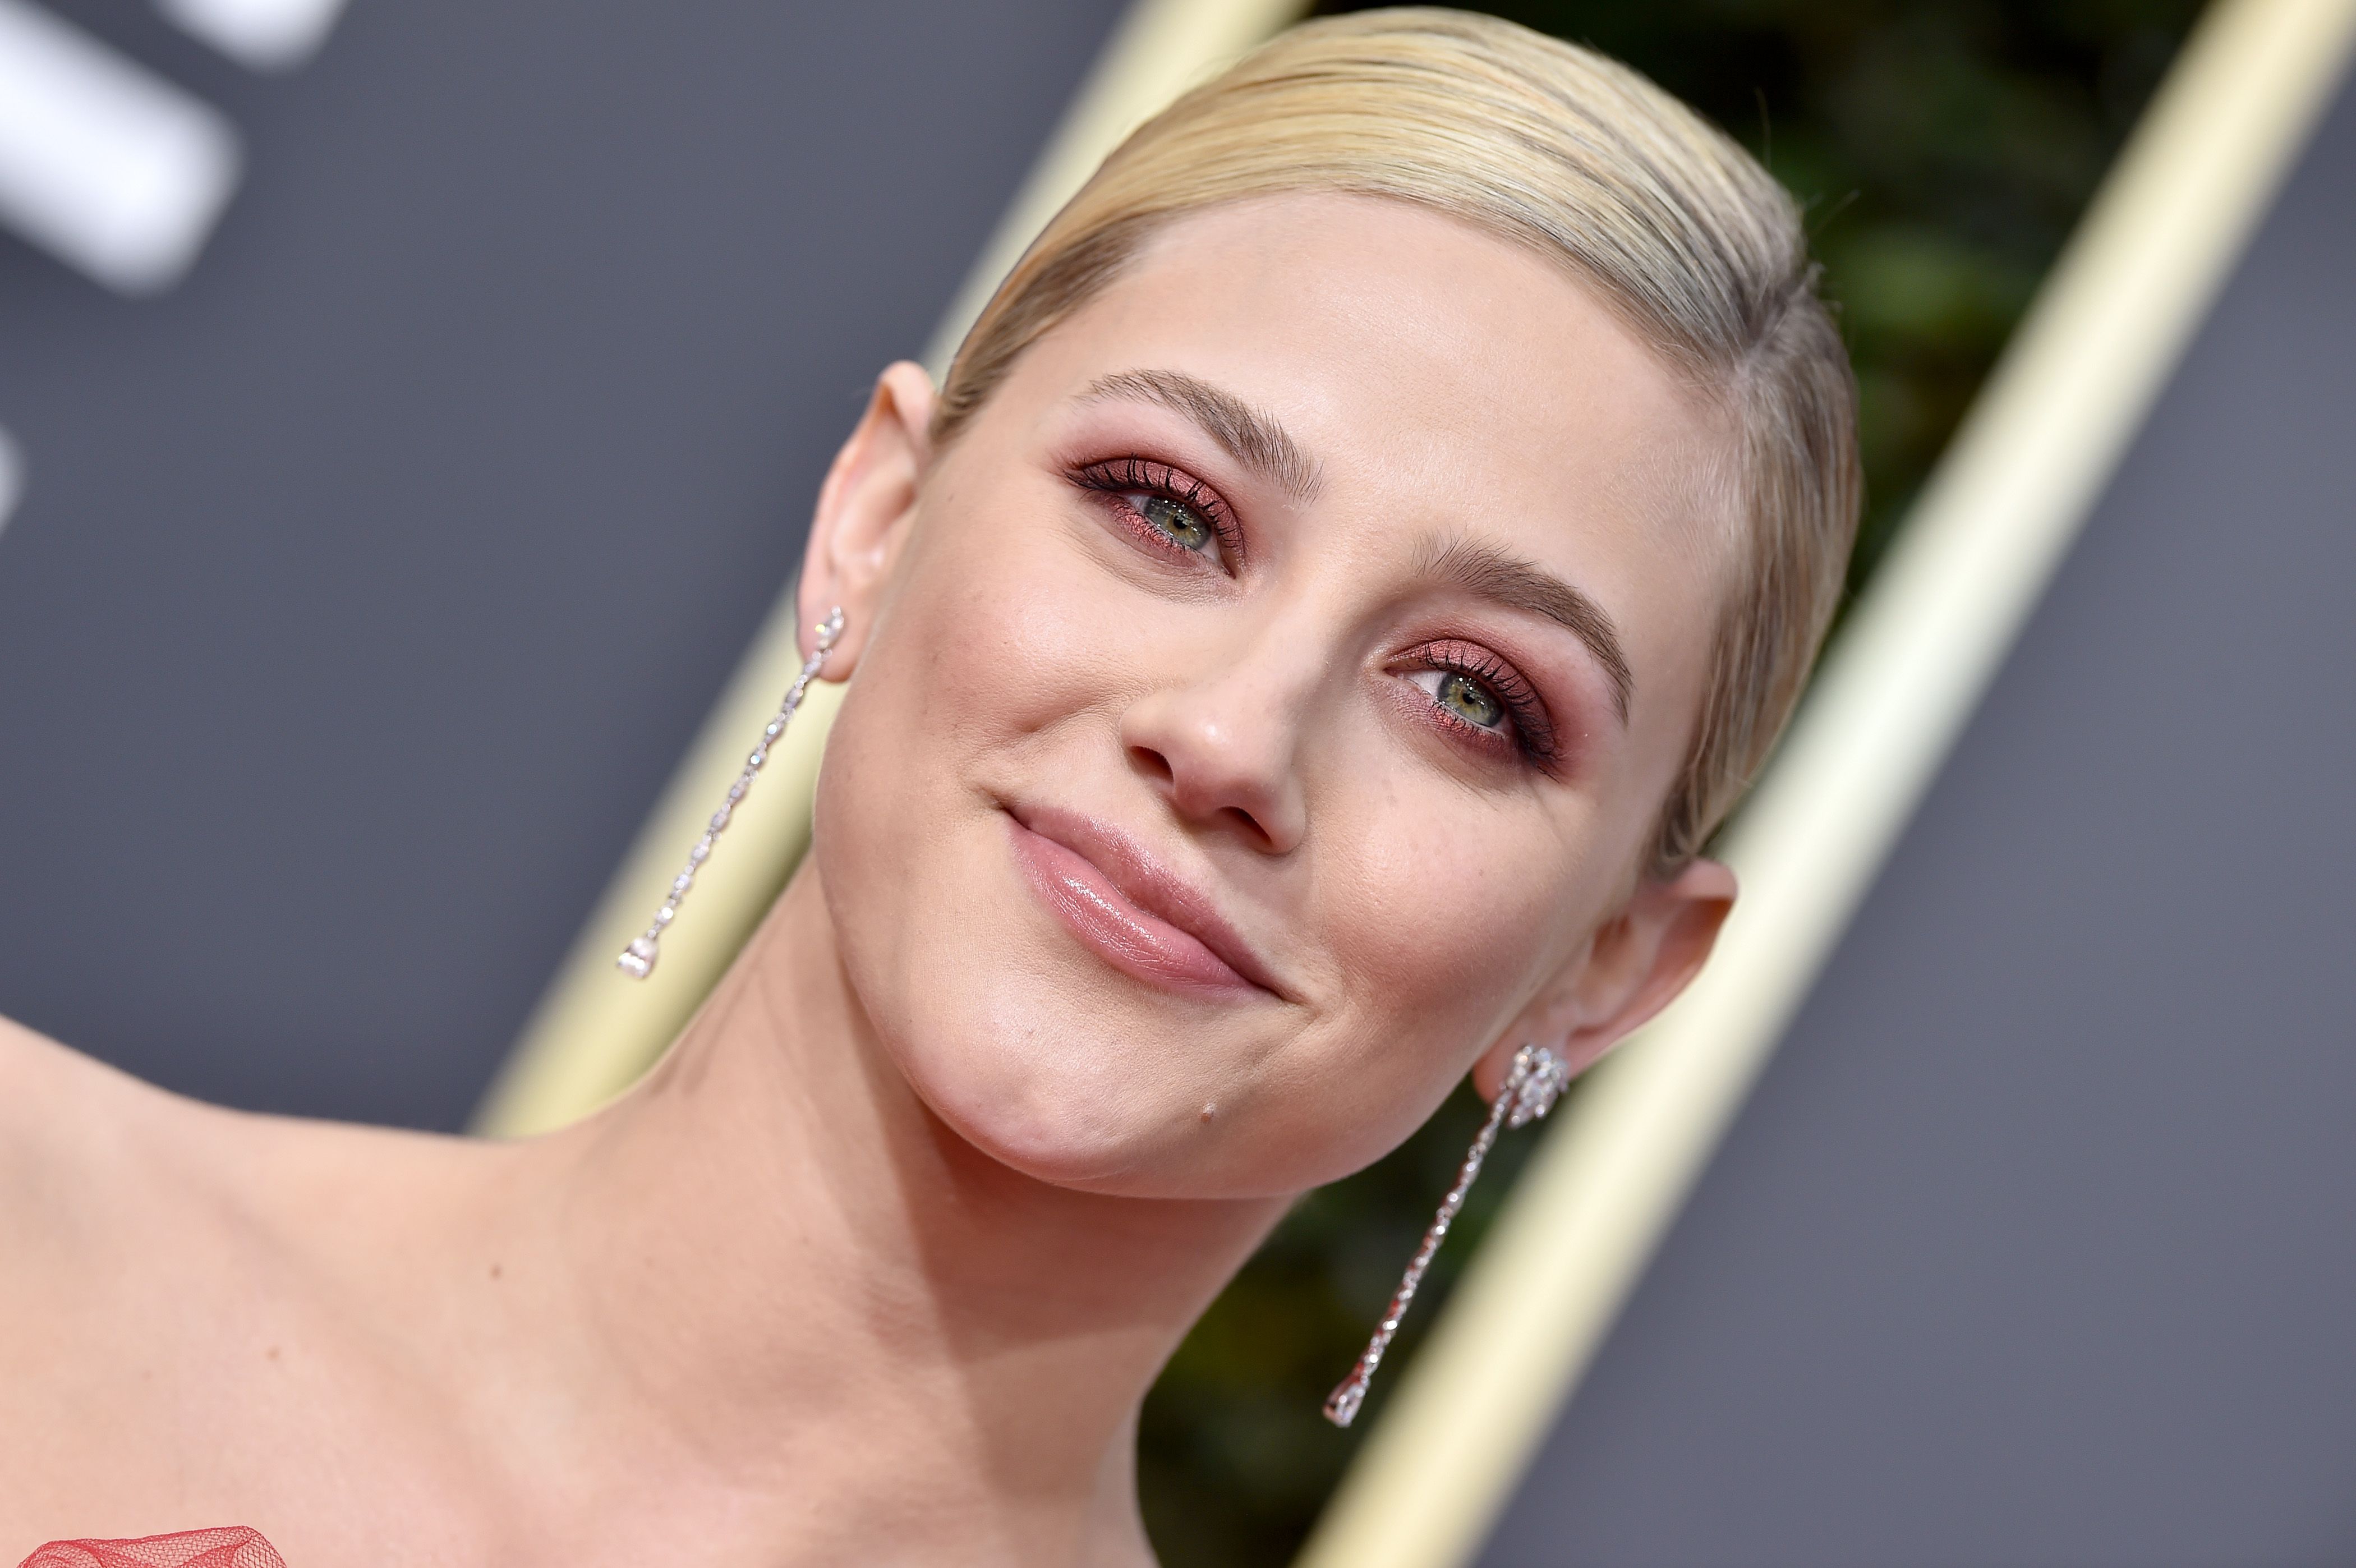 Lili Reinhart's Best 9 Moments as Betty Cooper on Riverdale